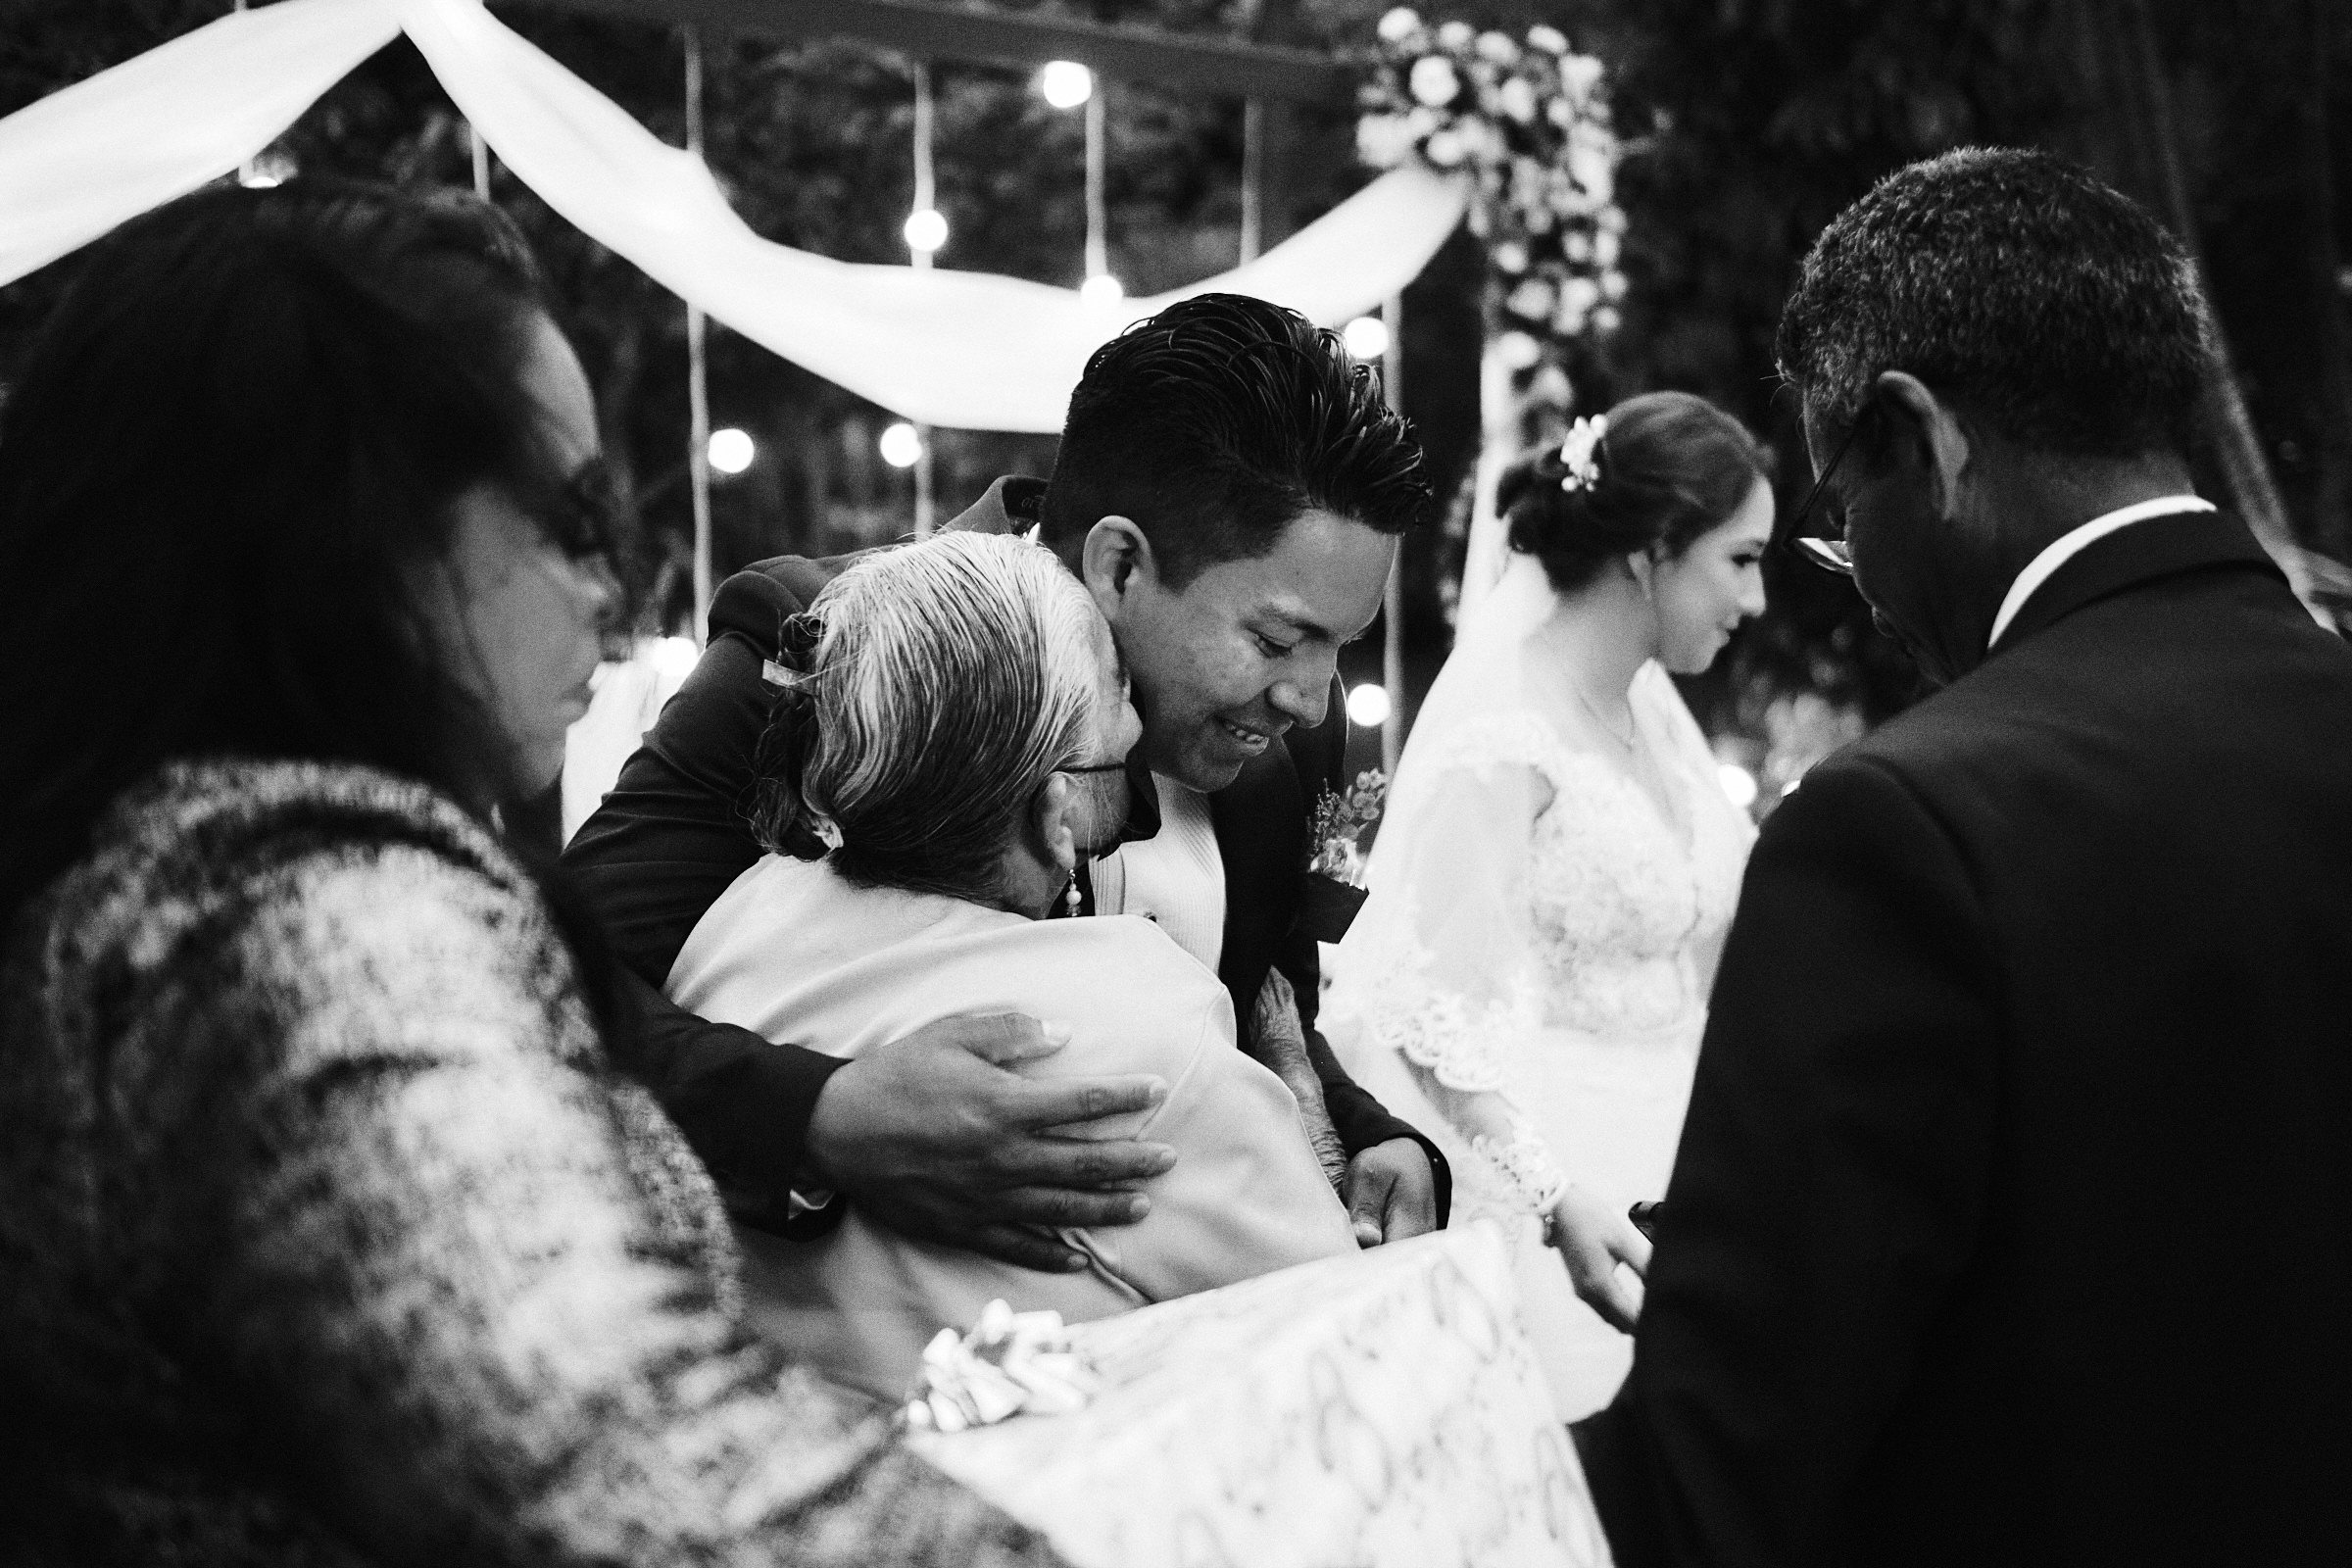 Grandmother Of Groom Gives Him A Kiss As She Congratulates Him In Wedding In Mexico